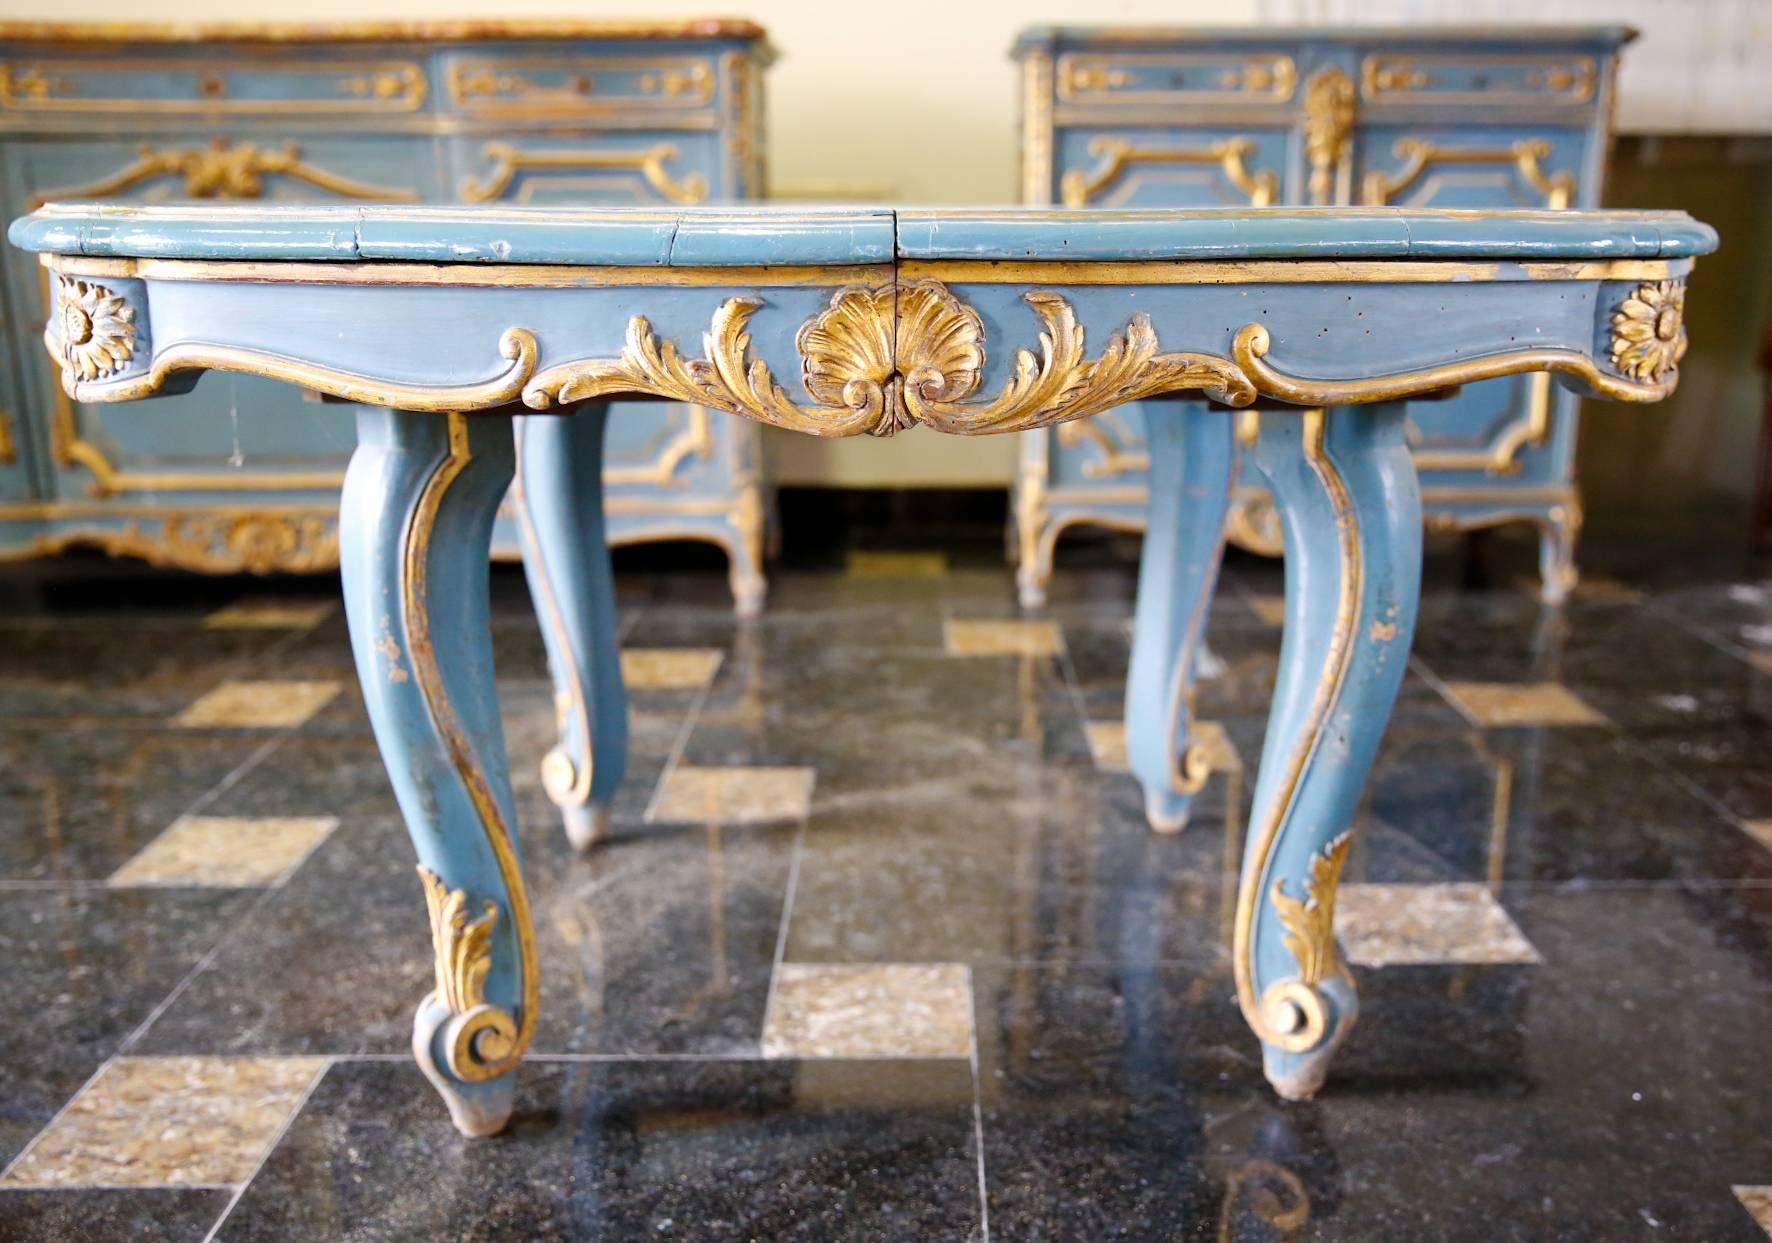 Antique French 19th century oval extending table with two separate extension leaves. The table is done by solid wood painted in light blue with shine gold accents, it has four beautifully carved legs and additional four hidden legs to support the